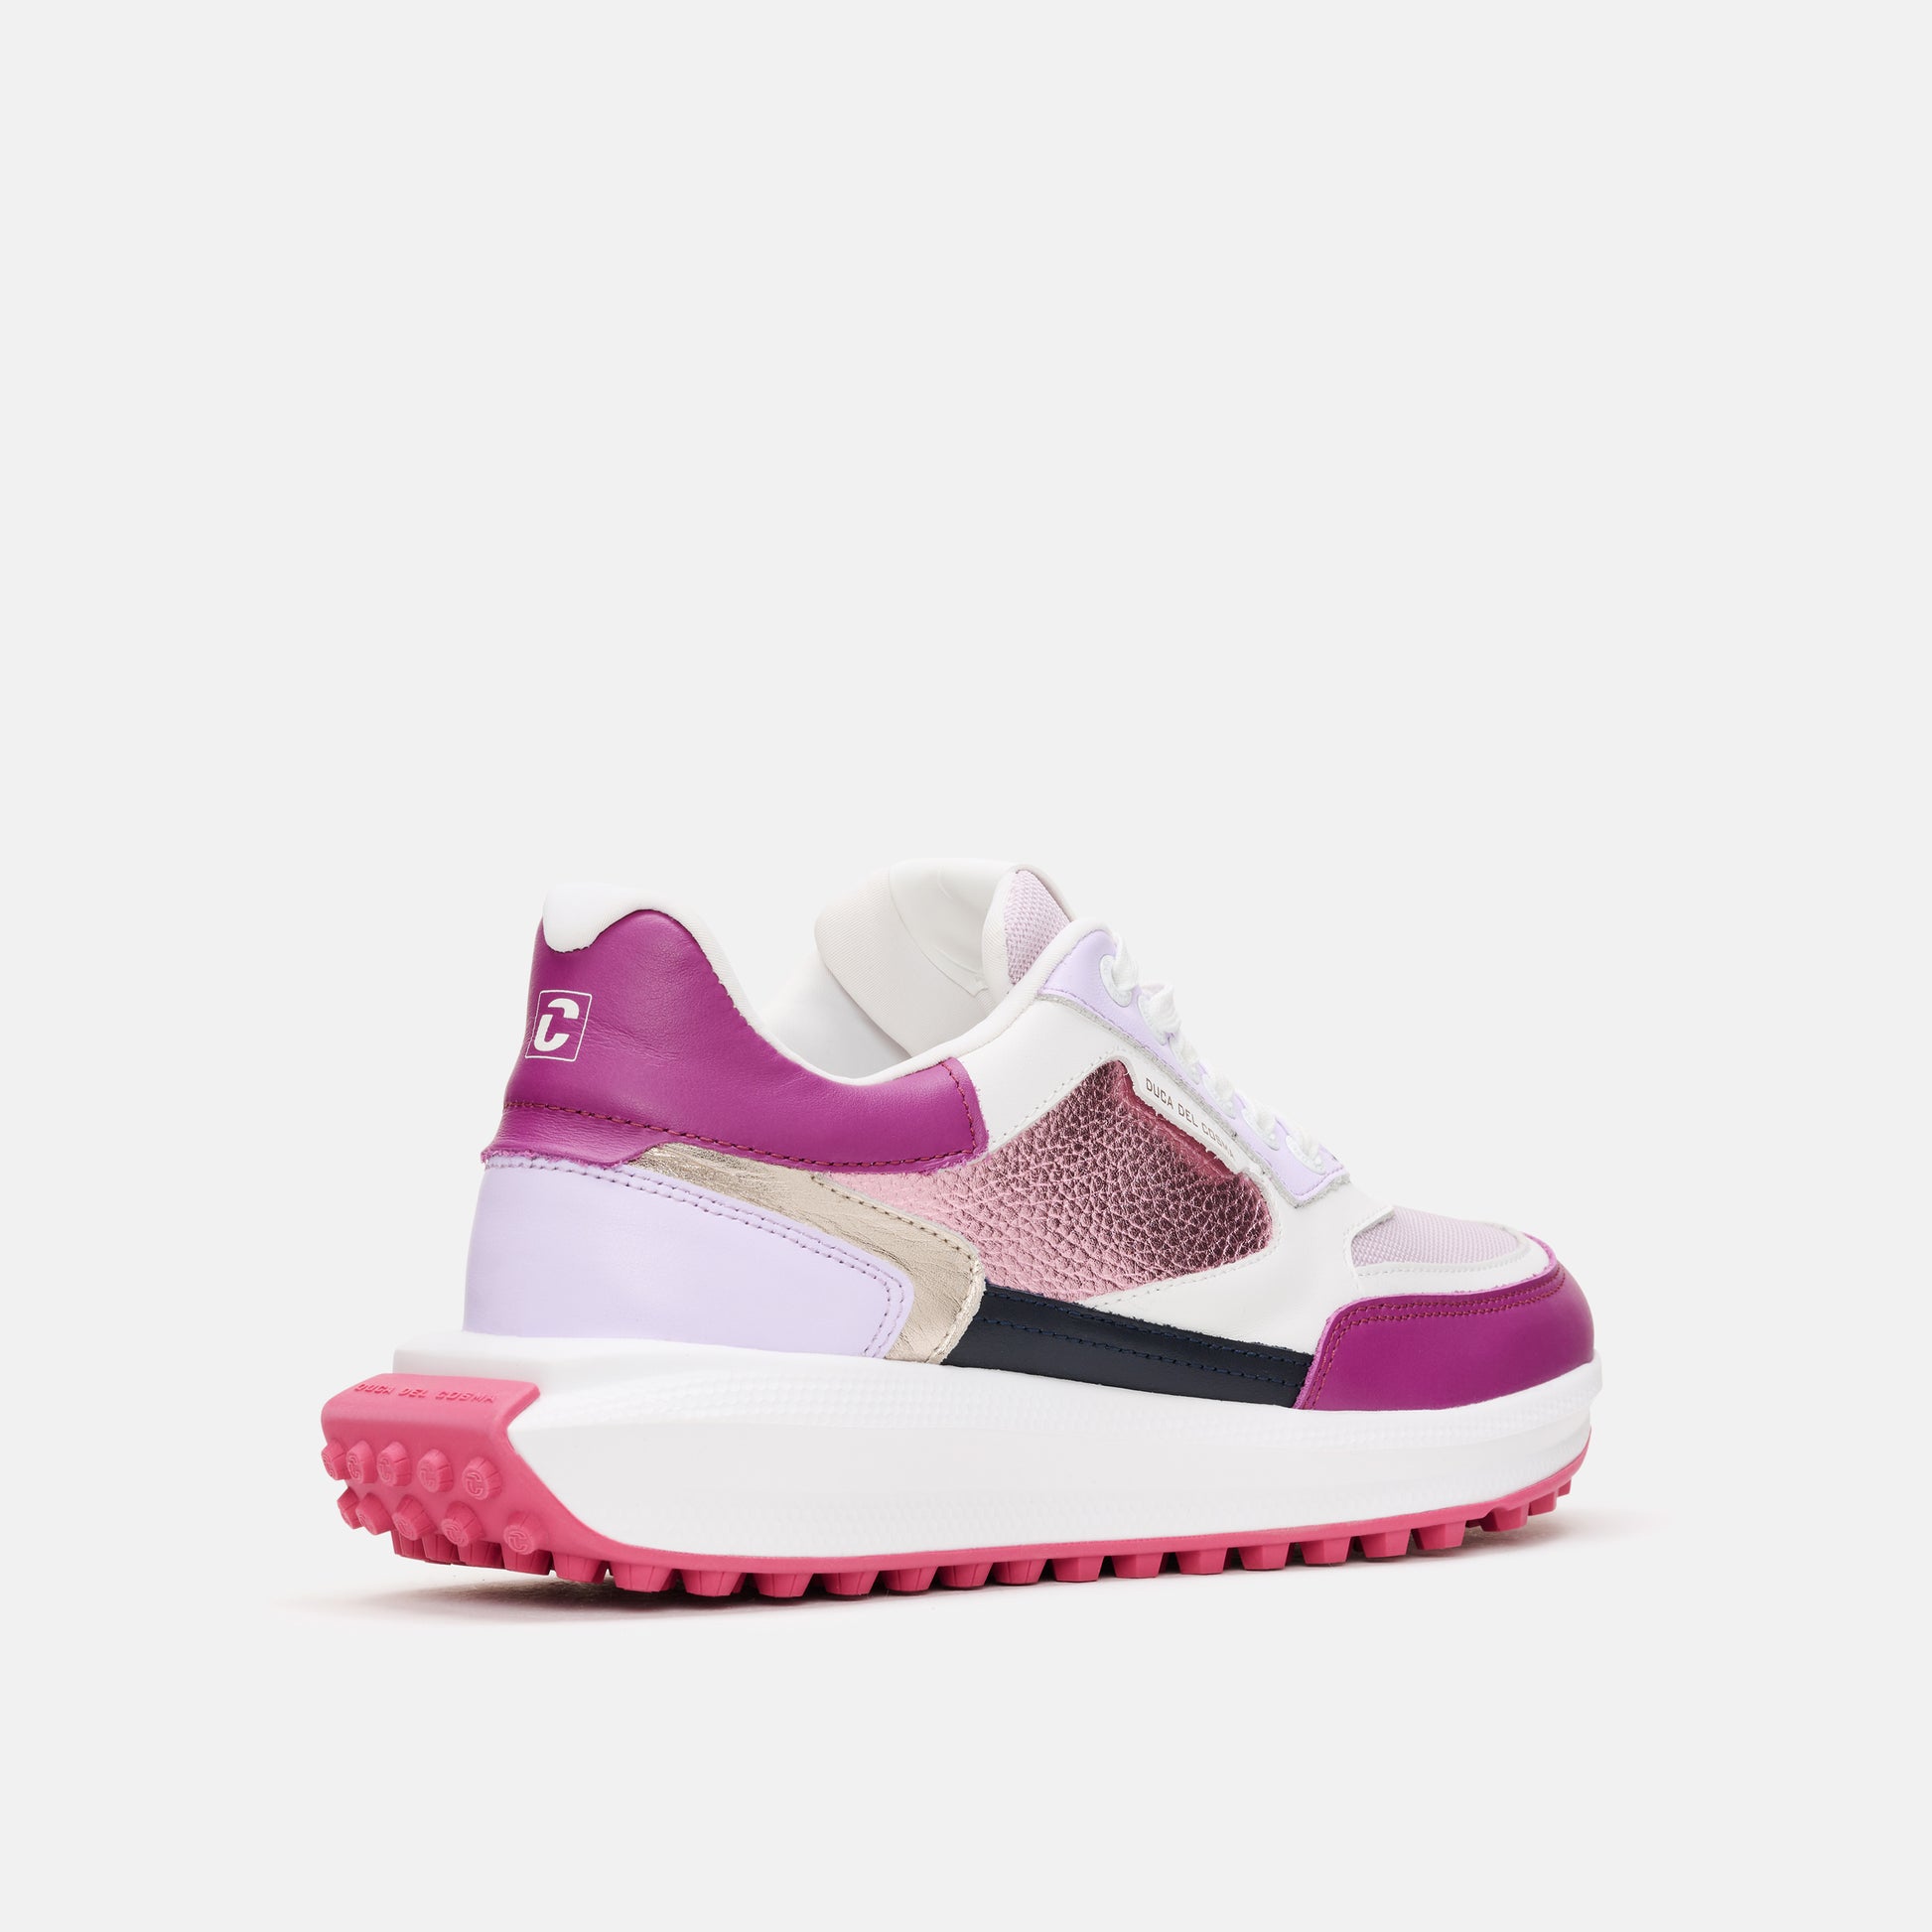 Lilac Golf Shoes, Pink Golf Shoes, Spikeless Golf Shoes, Waterproof Golf Sneakers, Lightweight Golf Shoes, Duca del Cosma Women's Golf Shoes.